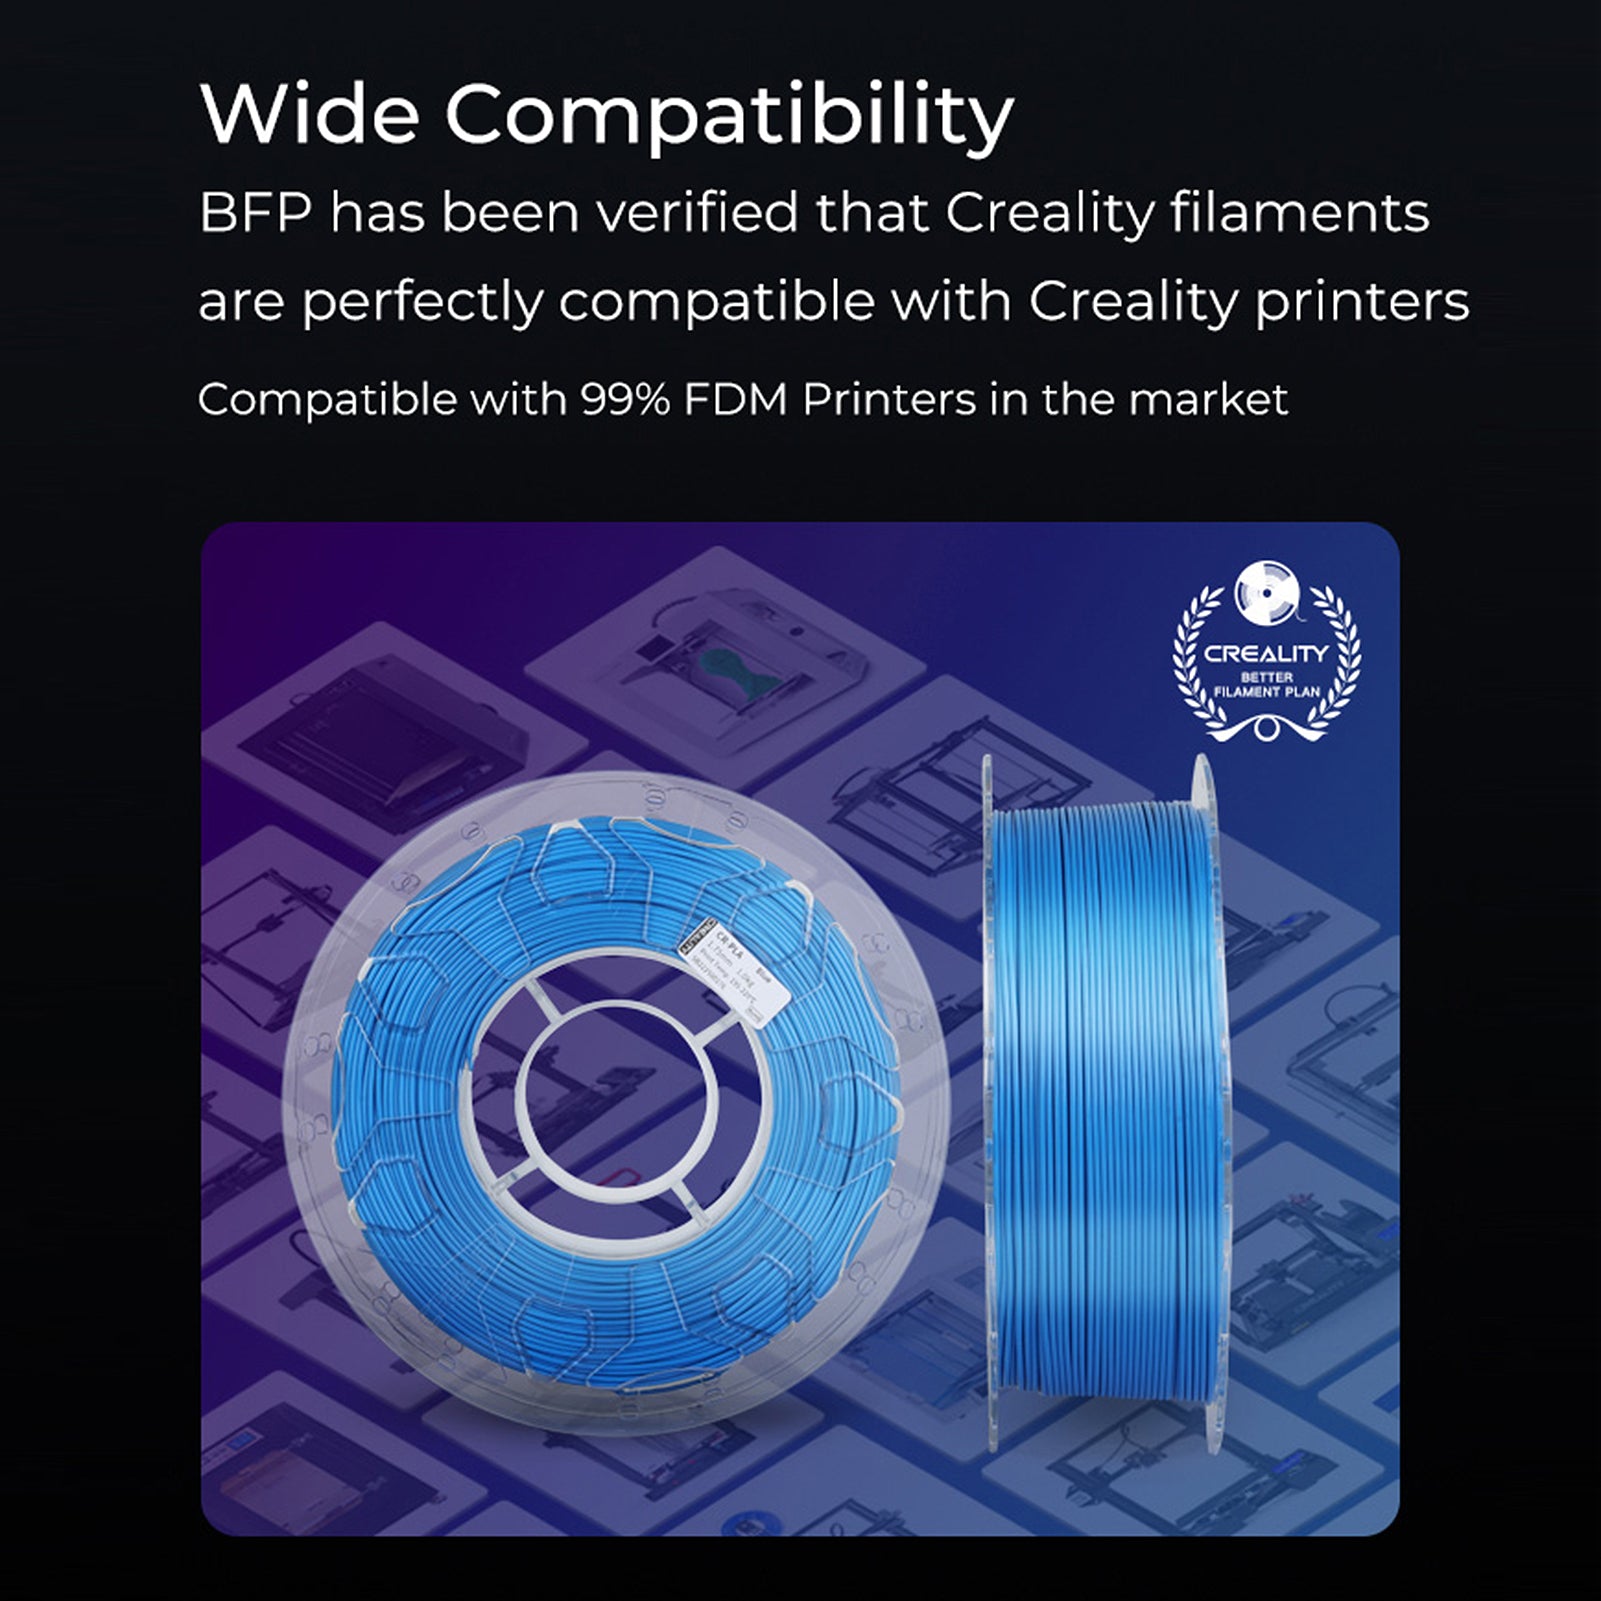 1kg Spool Creality Ender-PLA Filament 1.75mm diameter smooth flow, high toughness No Warp printing consumables for Ender Series CR Series All FDM Creality 3D Printer